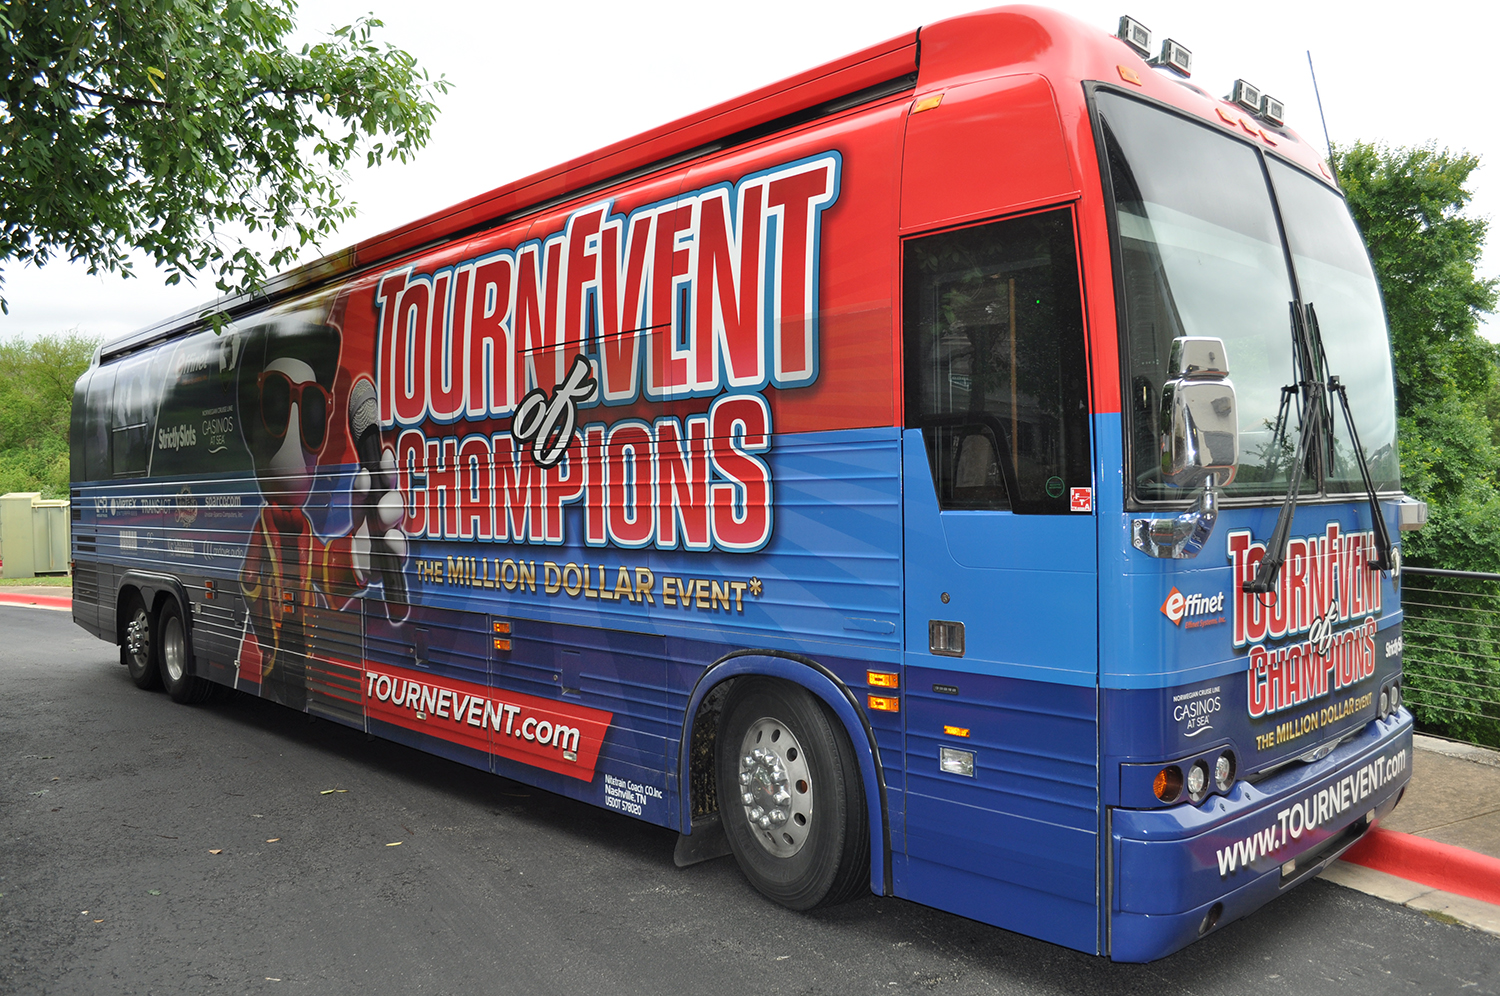 The National TournEvent of Champions® Blue bus gets ready to hit the road from the Multimedia Games® offices in Austin, Texas.